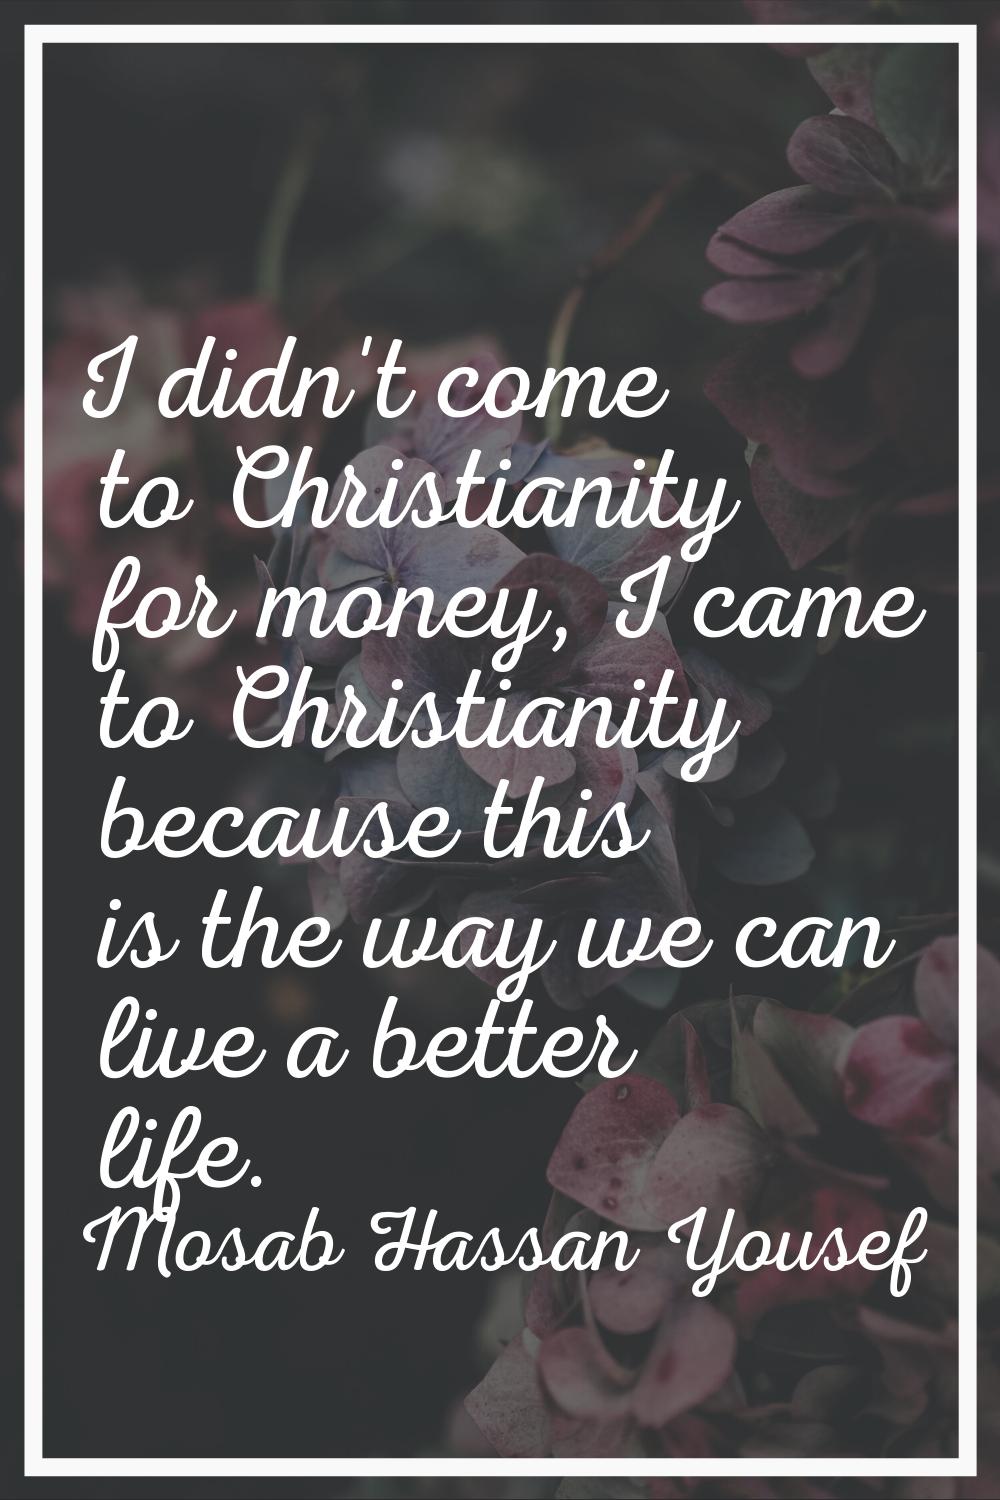 I didn't come to Christianity for money, I came to Christianity because this is the way we can live